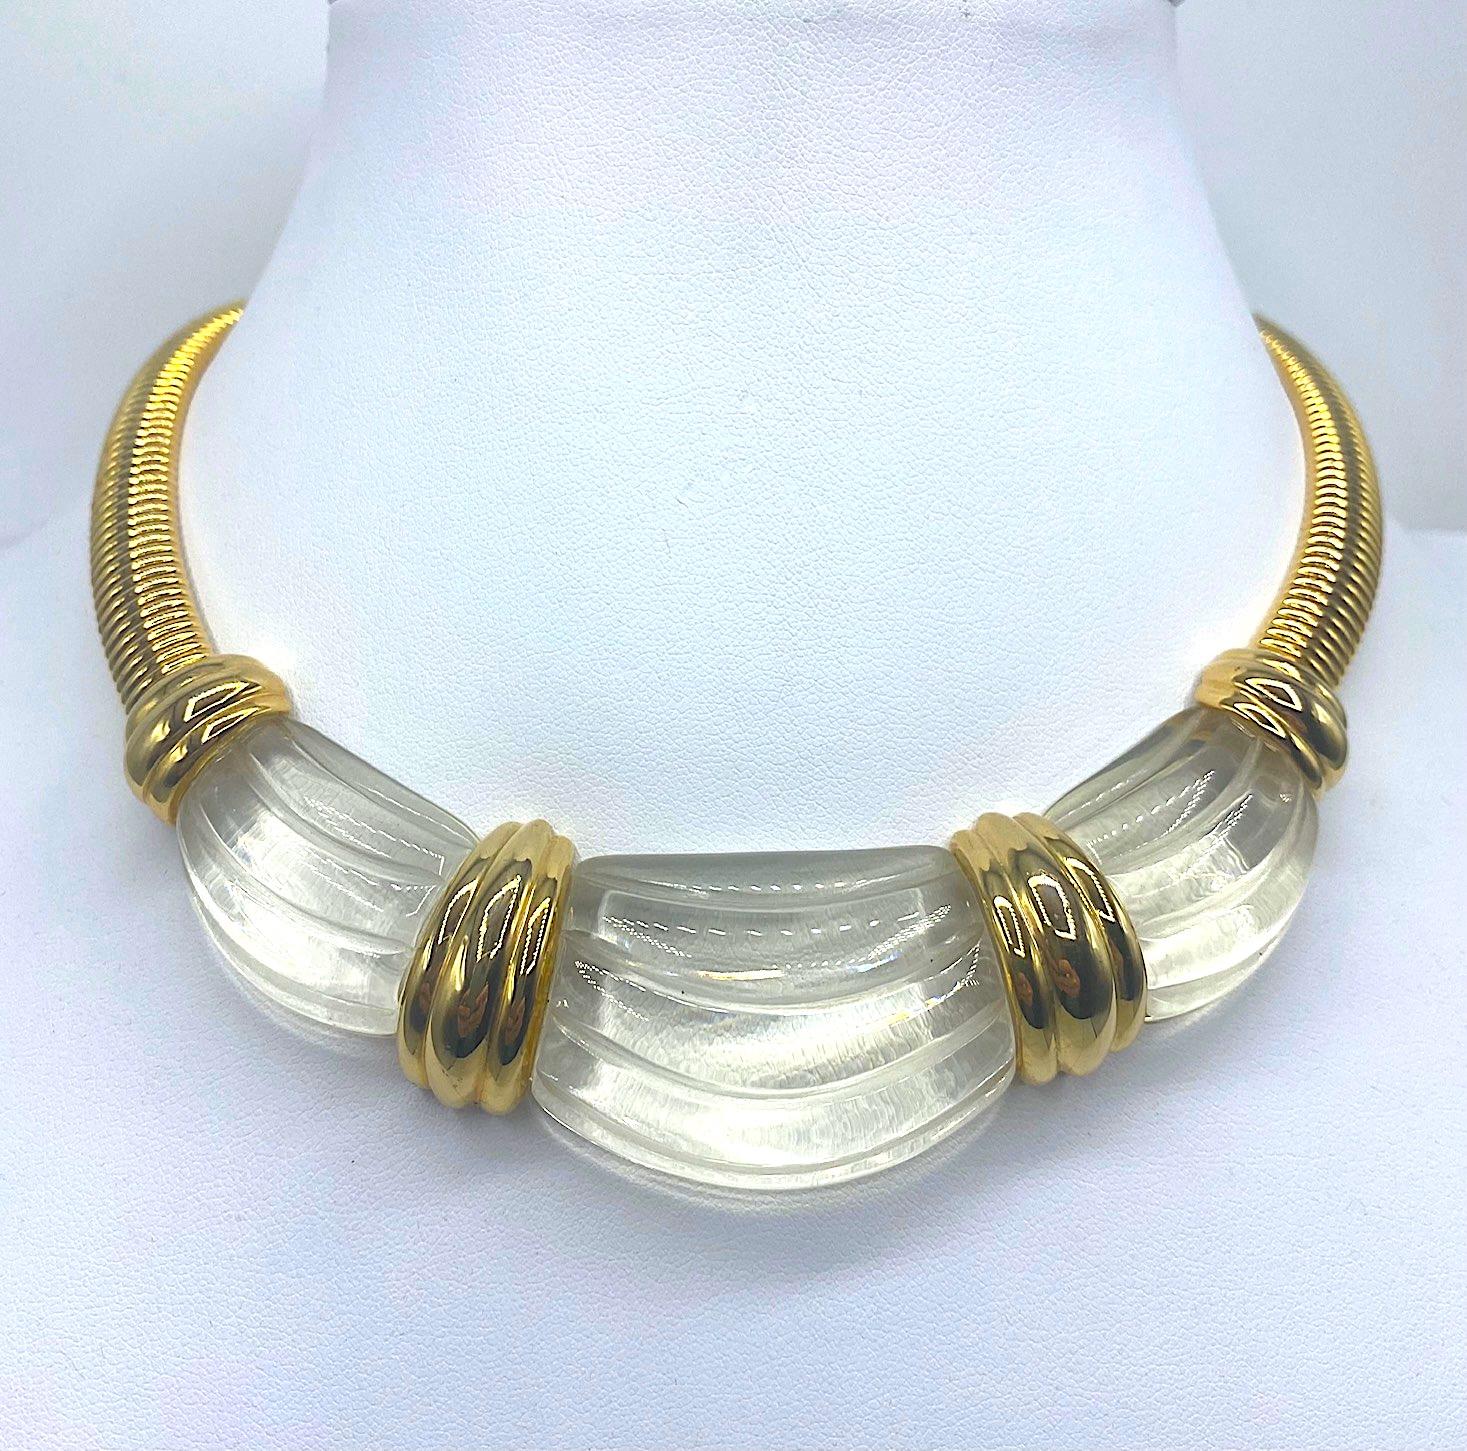 Elegant 1980s fashion necklace from Parisian fashion house Givenchy. The omega link necklace is richly gold plated and set with a molded swag clear lucite center piece in faux carved rock crystal. The necklace is 16 inches long with a 1.25 inch drop